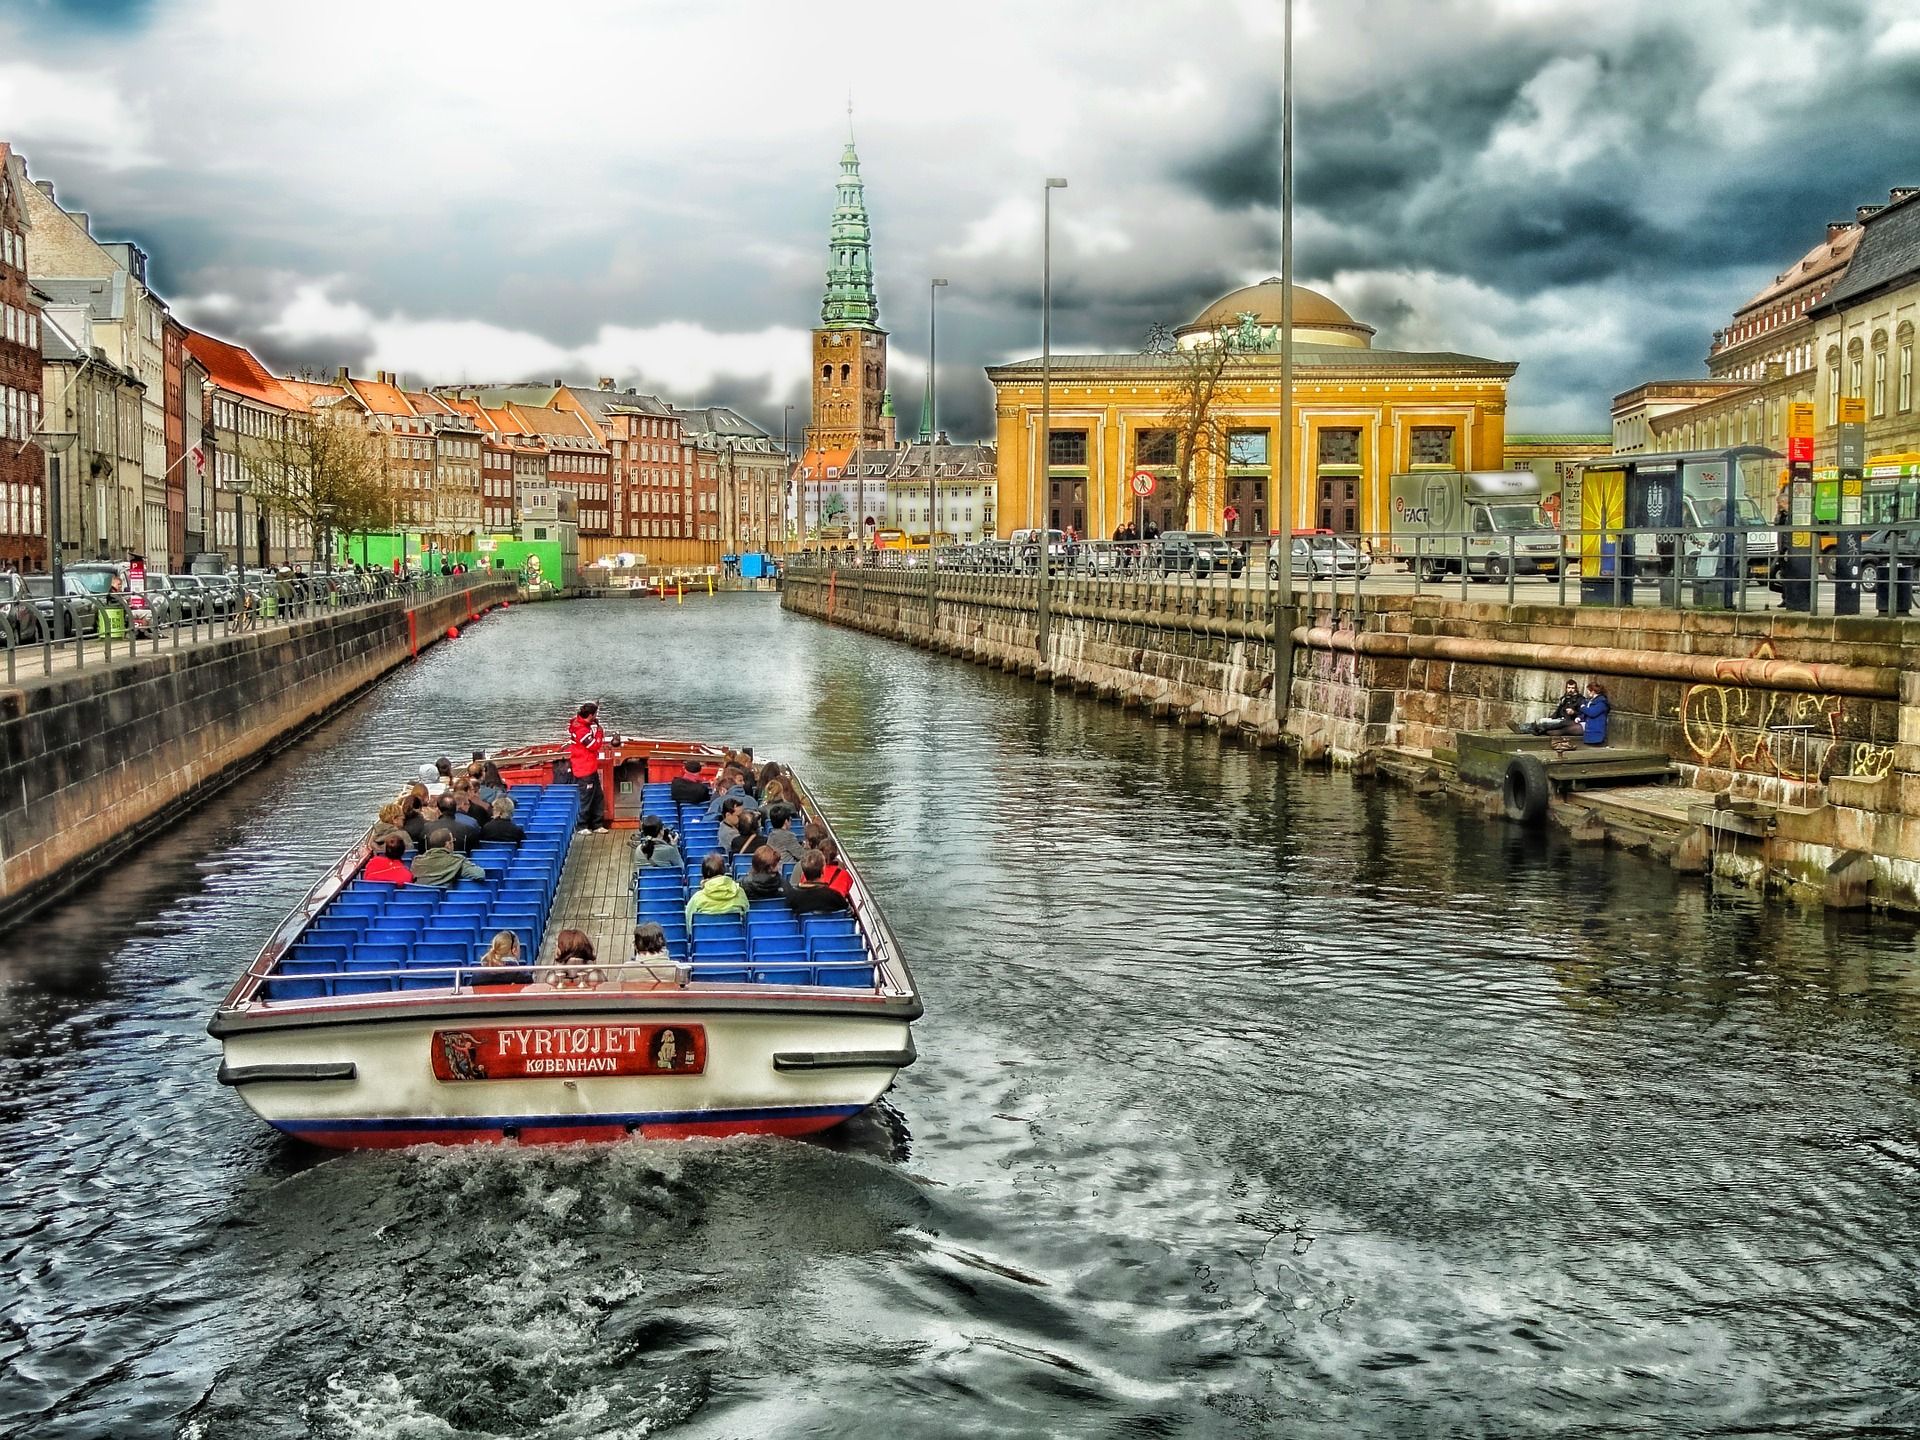 Local Round-up: New route to ferry tourists between Copenhagen and Helsingør